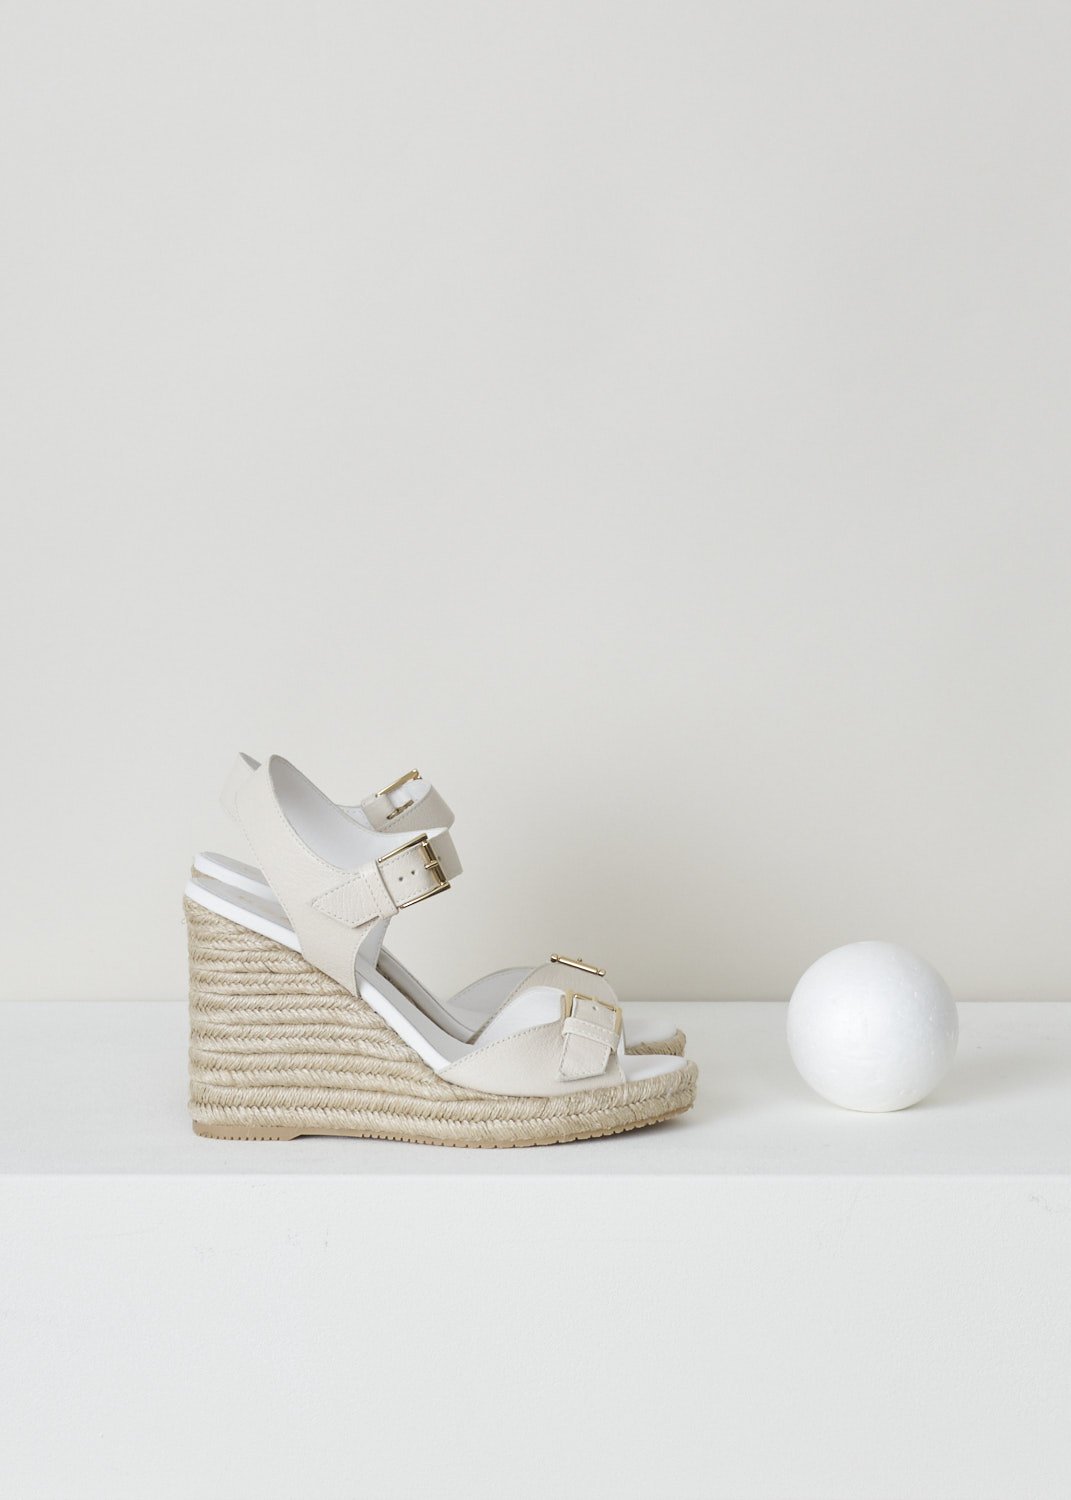 Hogan, Wedge heeled sandals in beige, HXW5580DL20P7KB018_H558_P7K, beige, side, These lovely cream coloured wedge heeled sandals fills us all with summer vibes. Featuring a single strap over the vamp with an gold-tone ornamental buckle. The ankle strap however, has a functional buckle which acts as your fastening option. 

Heel height: 11 cm / 4.3 inch. 